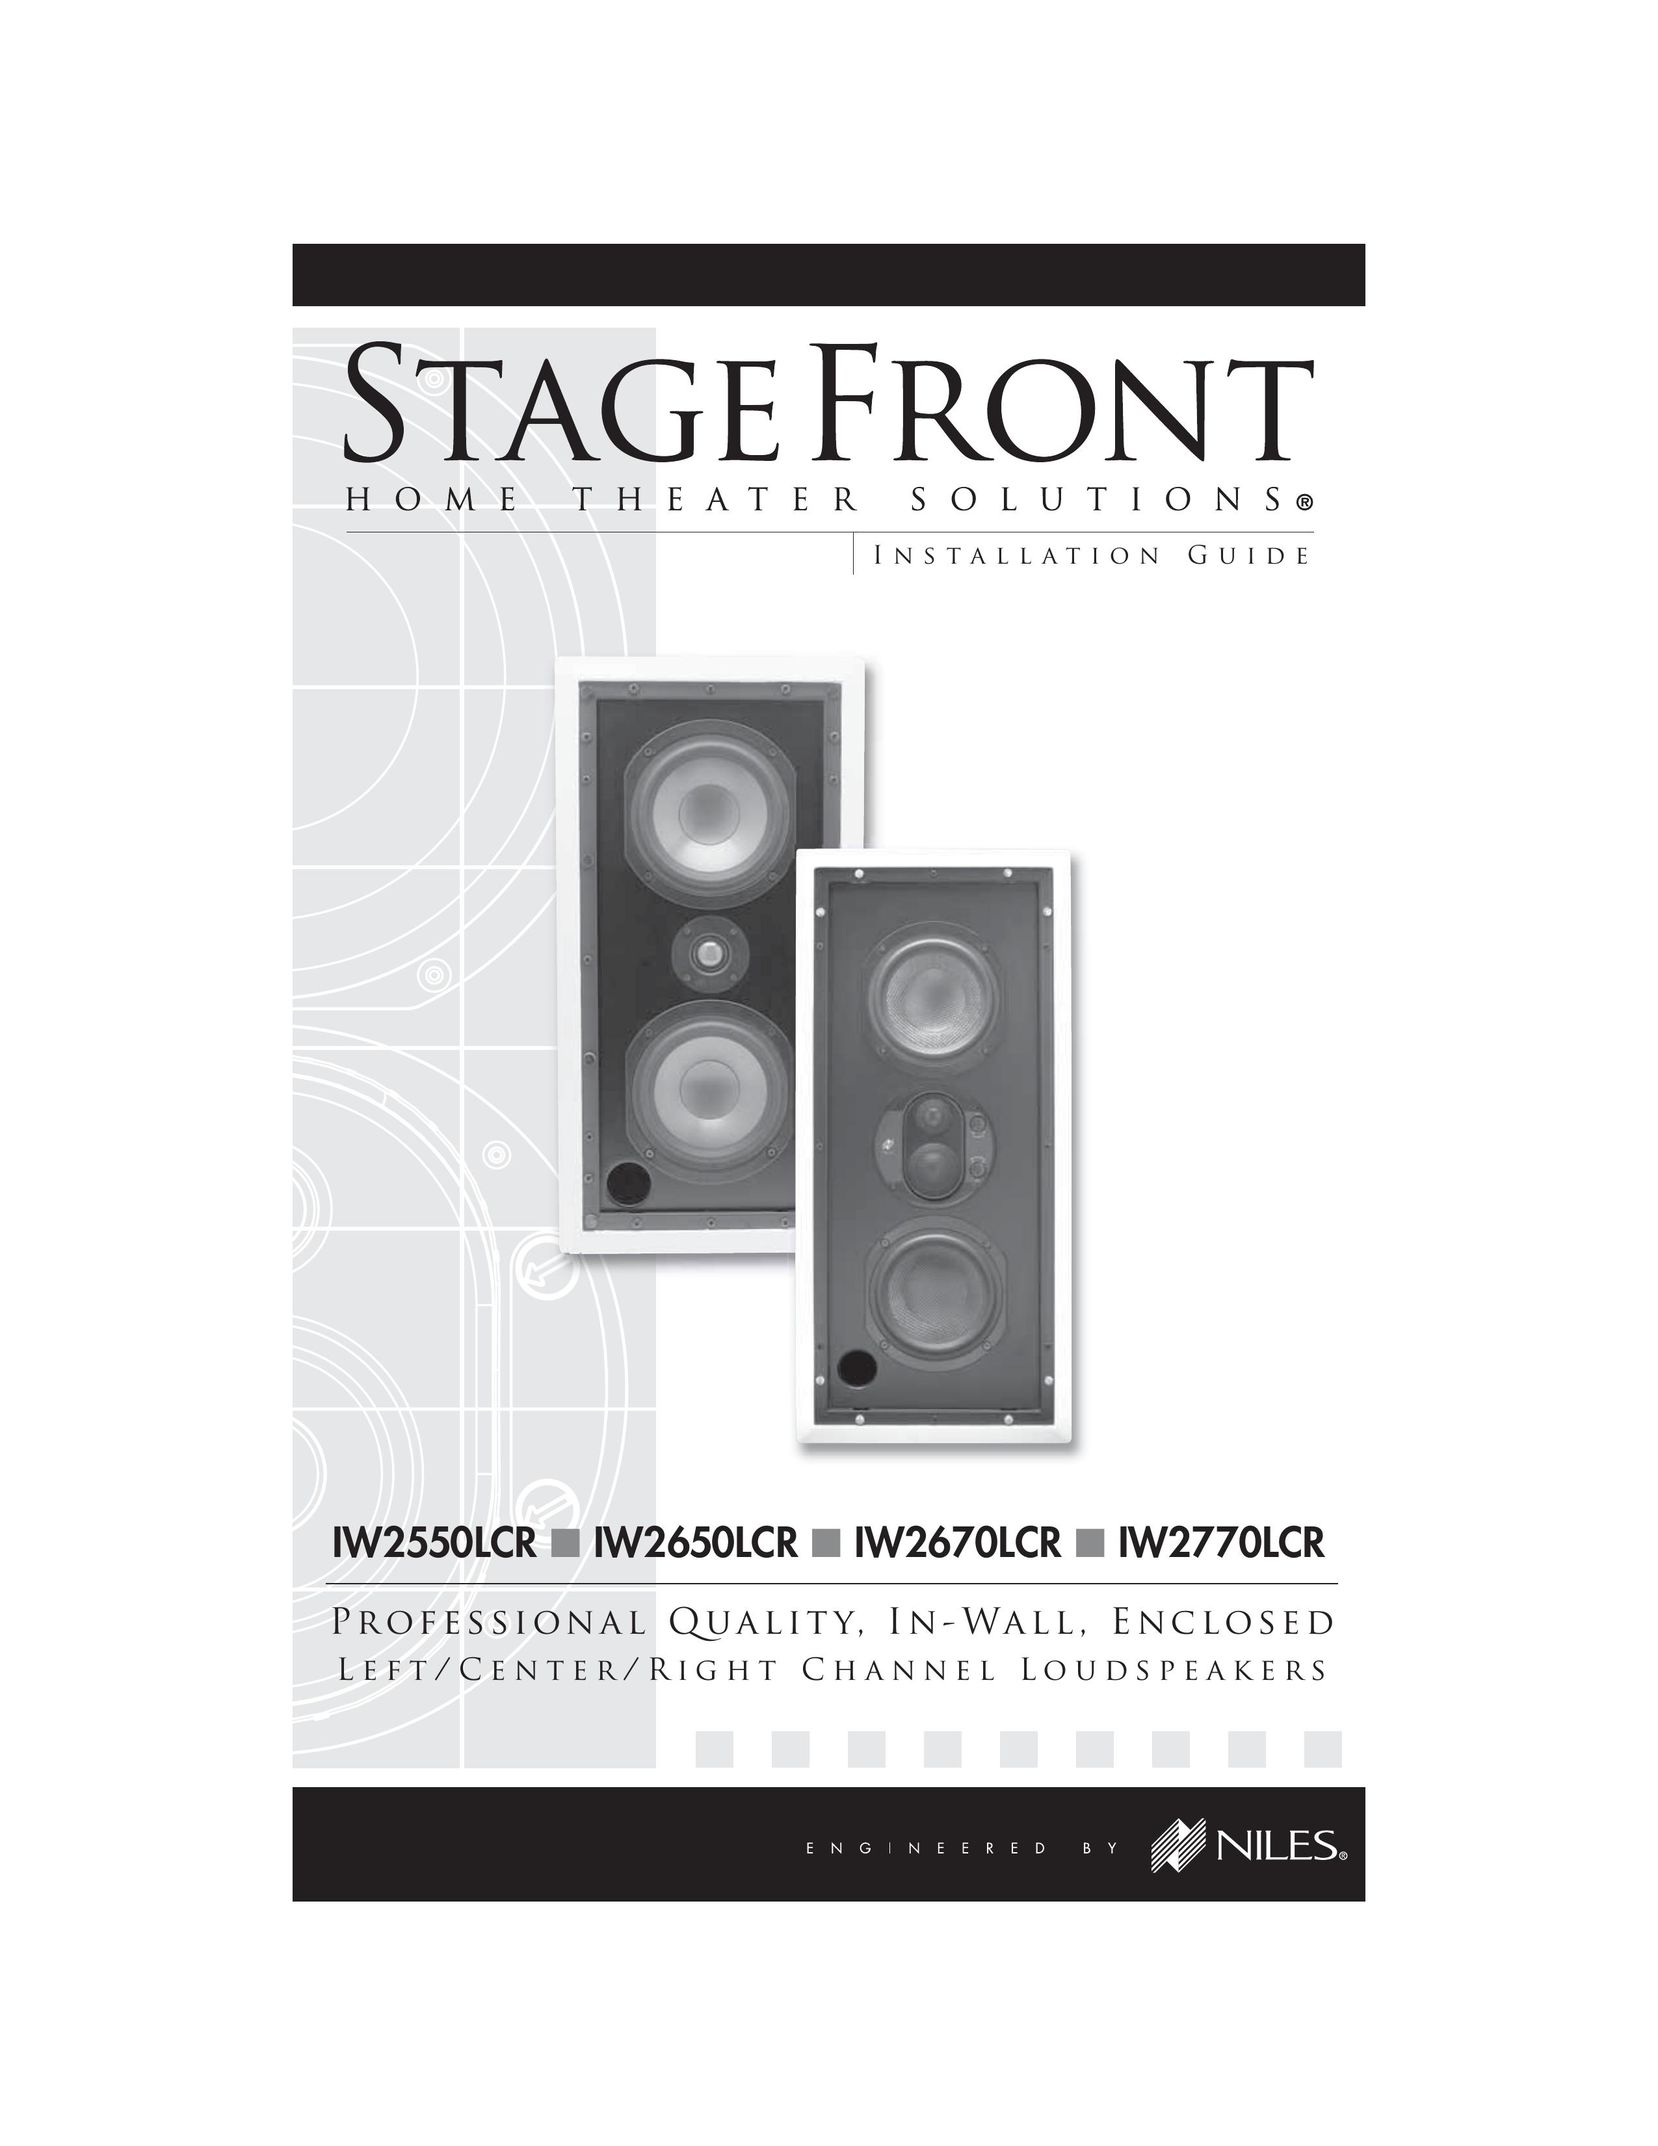 Niles Audio IW2770LCR Speaker System User Manual